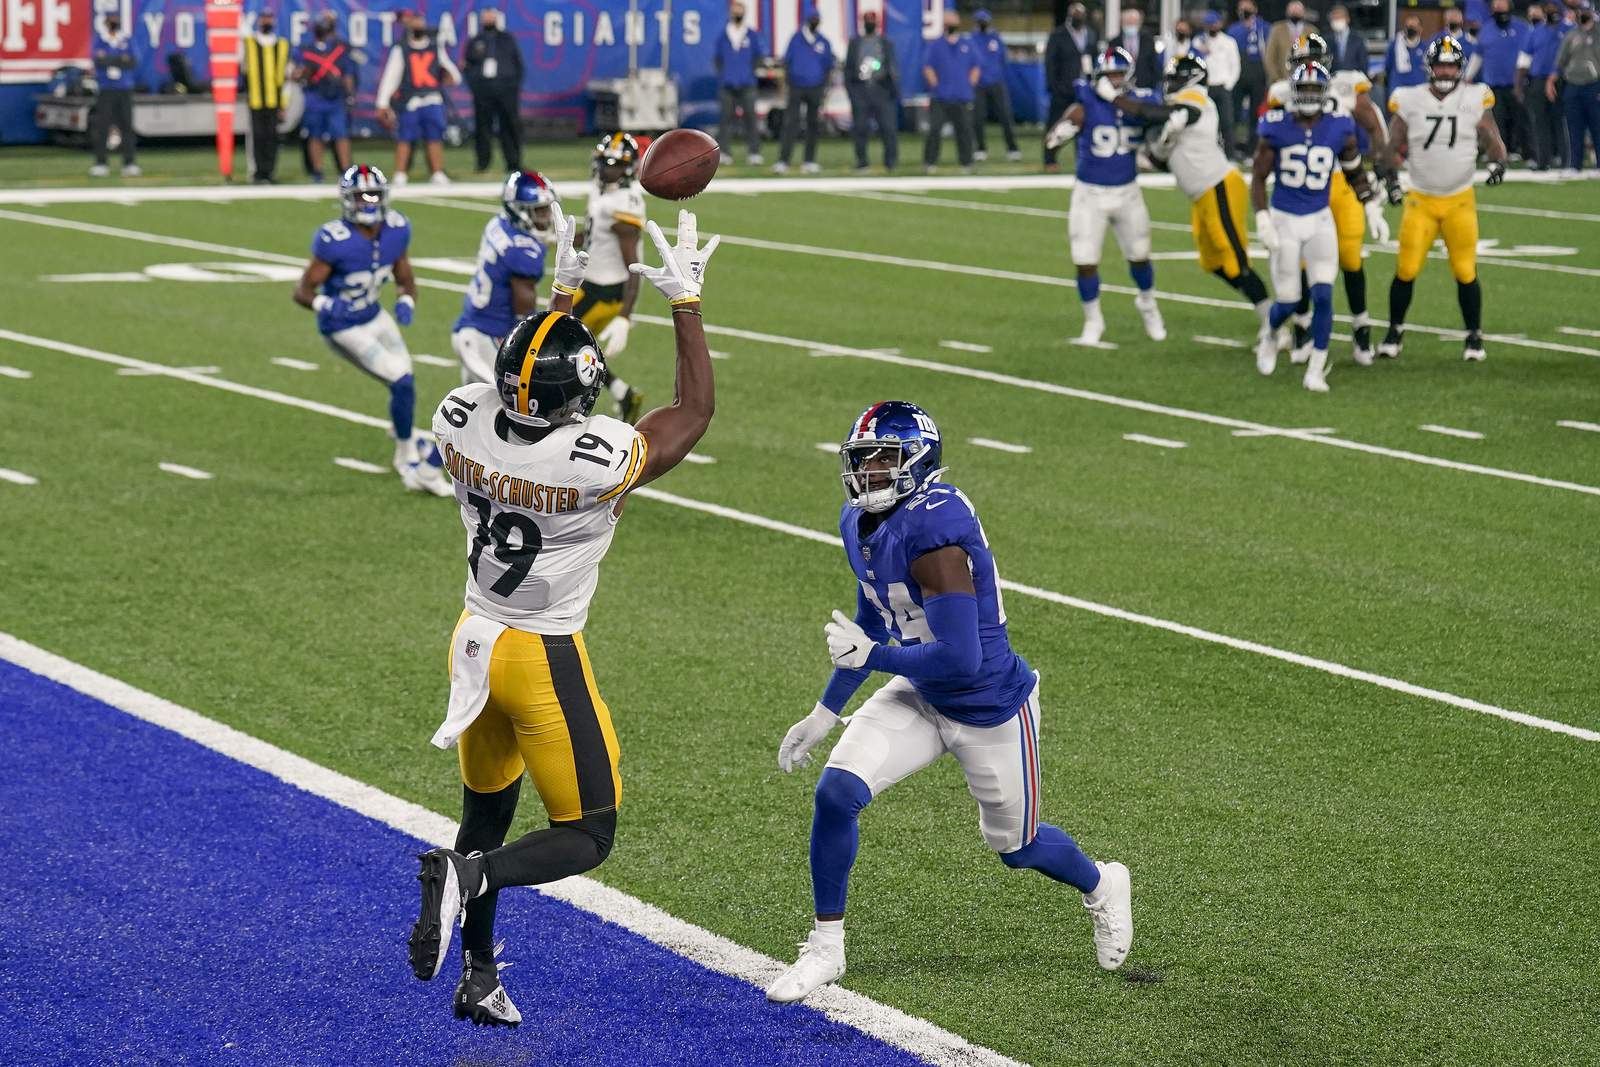 Defense, Snell, Big Ben carry Pittsburgh over Giants 26-16